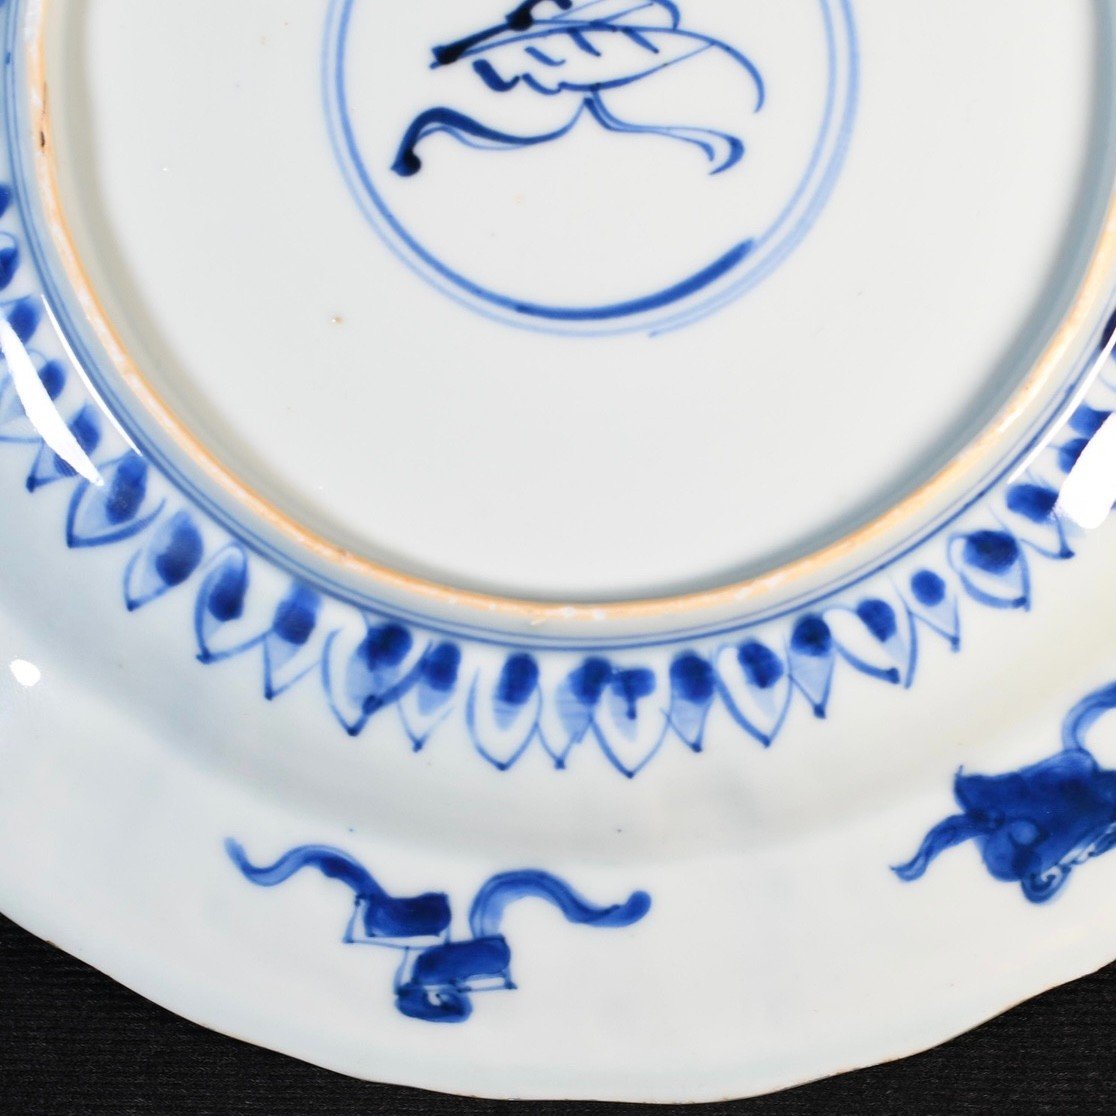 Blue And White Porcelain Dish With Floral Decor In Cartouches - China 18th Kangxi Period-photo-5